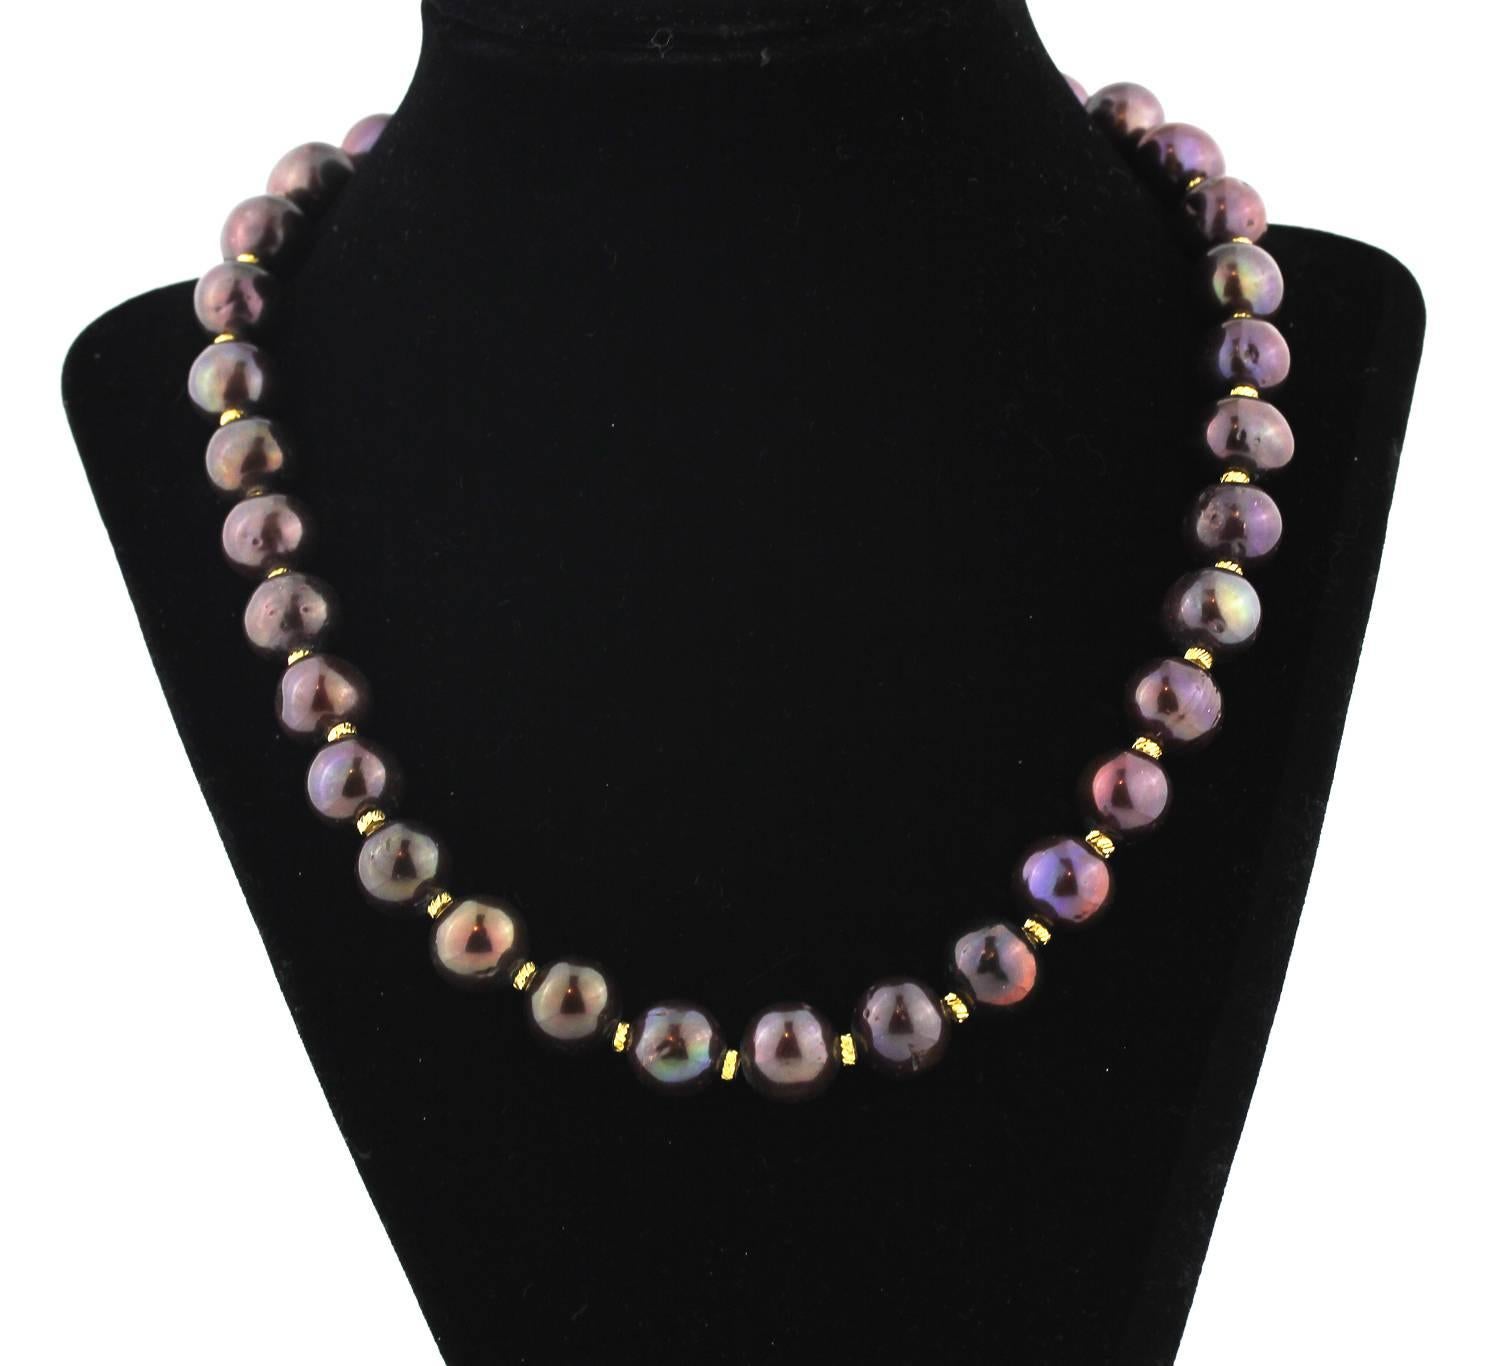 These unique real cultured Pearls glow chocolate and wine colors and are enhanced with goldy accents on this handmade necklace.
Size:  approximately 13 mm;  Length:  19 inches;  Clasp:  gold plated
